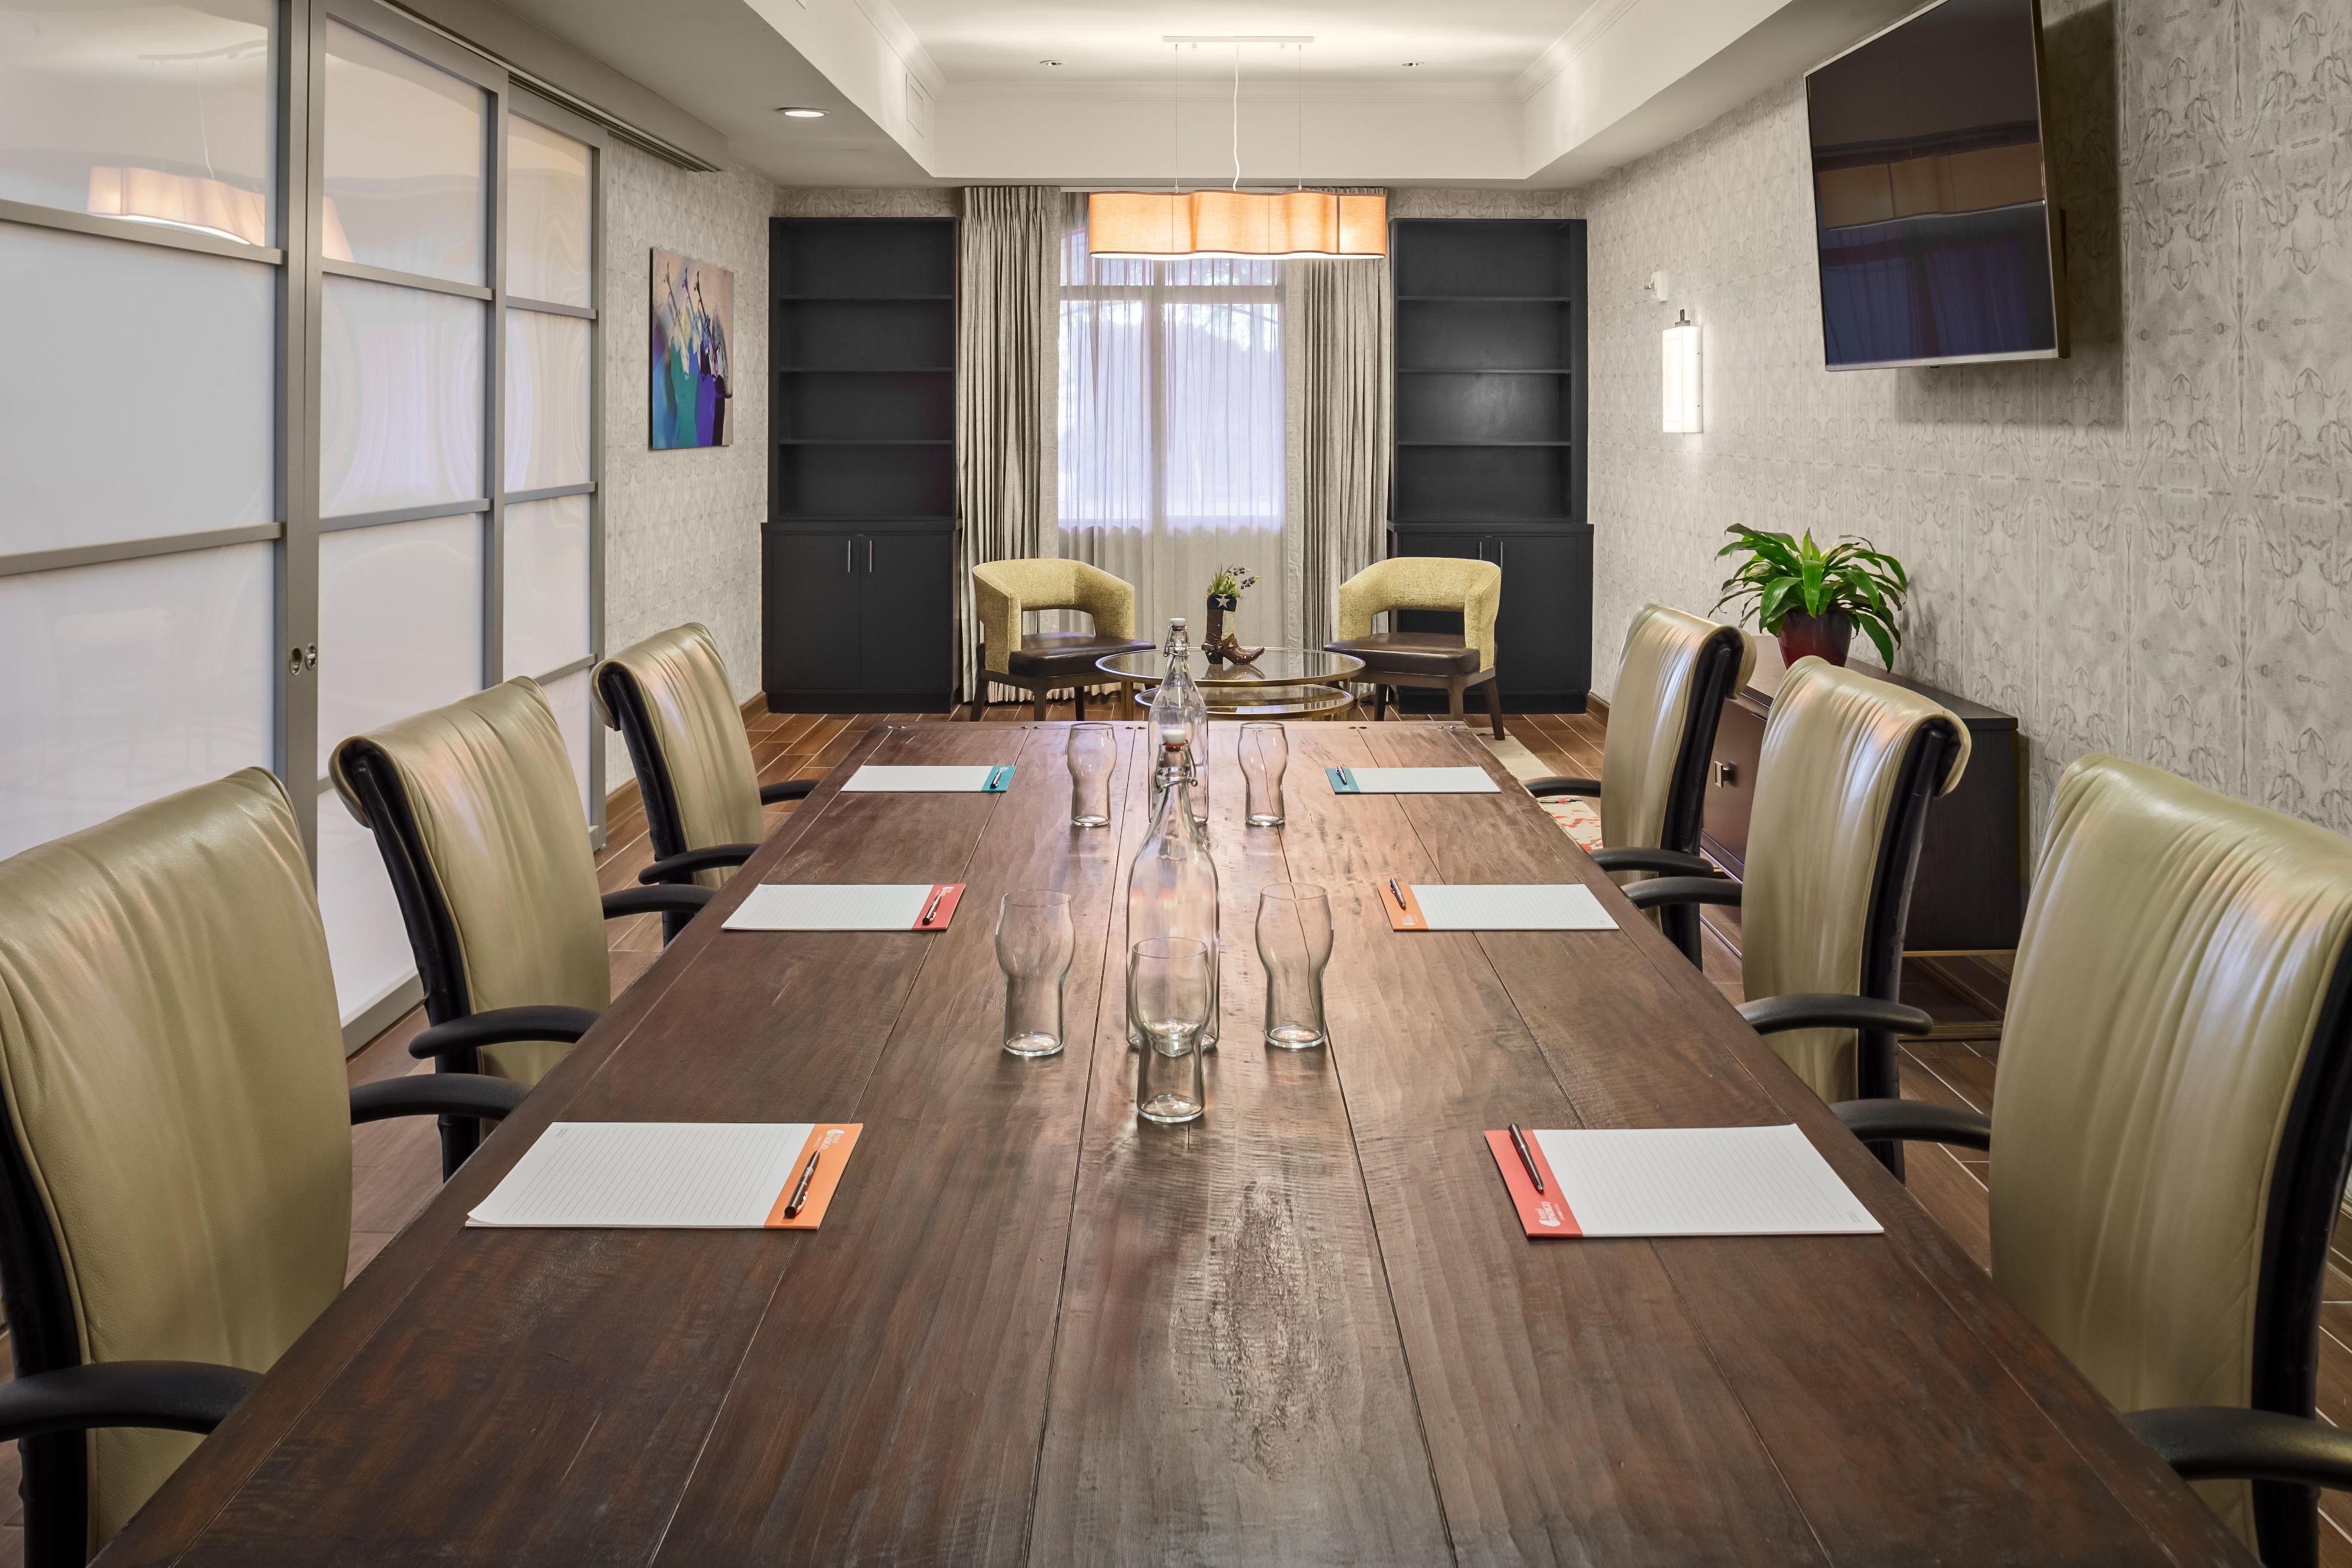 Host your next meeting or social event in our newly renovated meeting space.  Enjoy complimentary event parking through December 31, 2020.